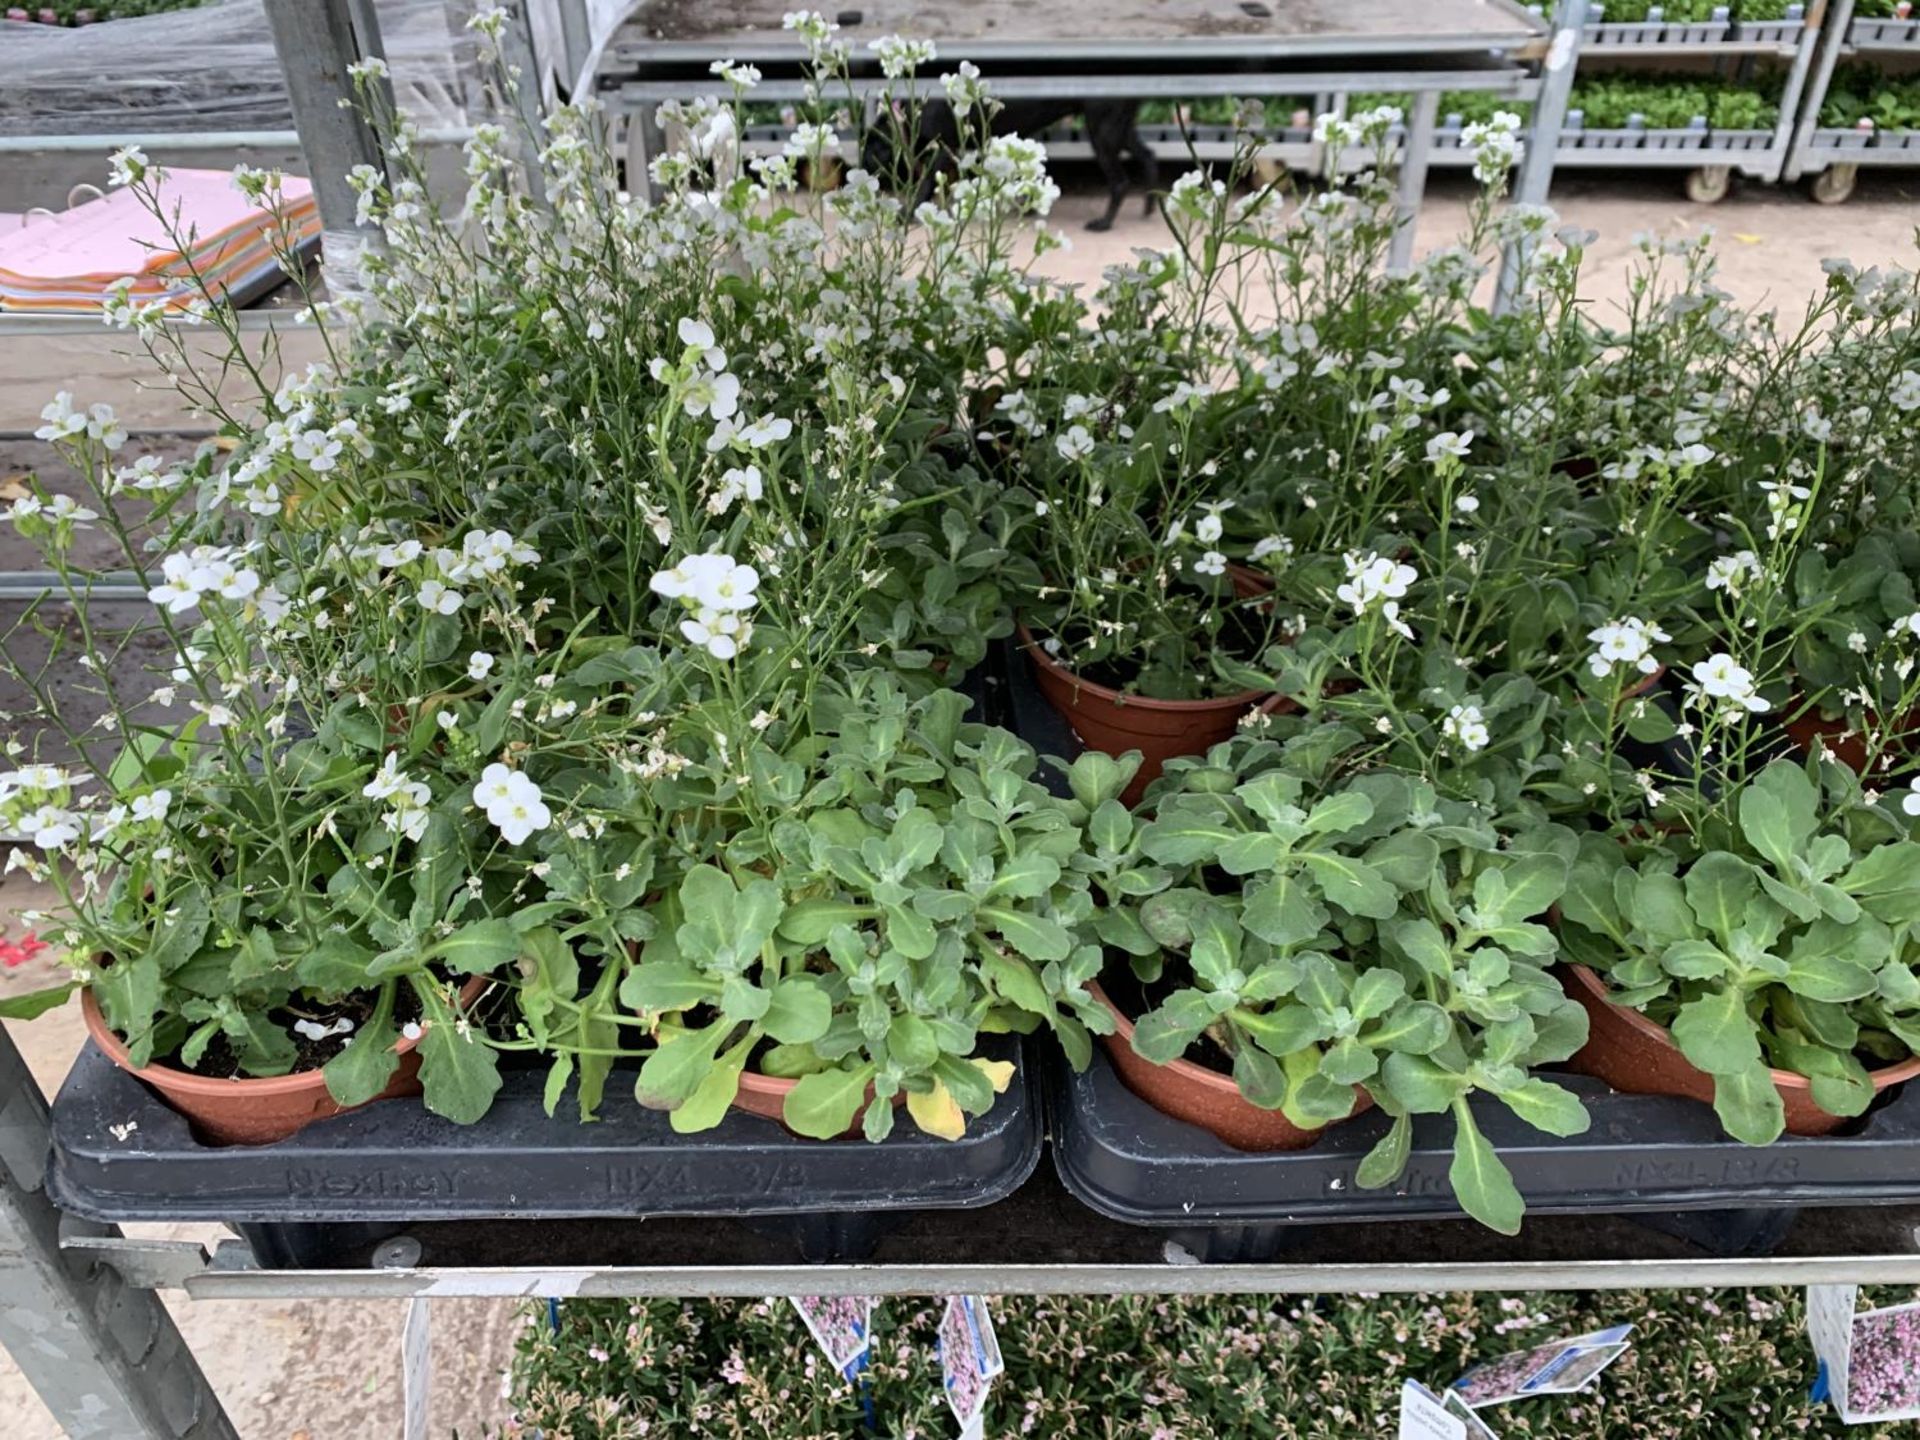 SIXTEEN POTS OF WHITE ARABIS TO BE SOLD FOR SIXTEEN PLUS VAT